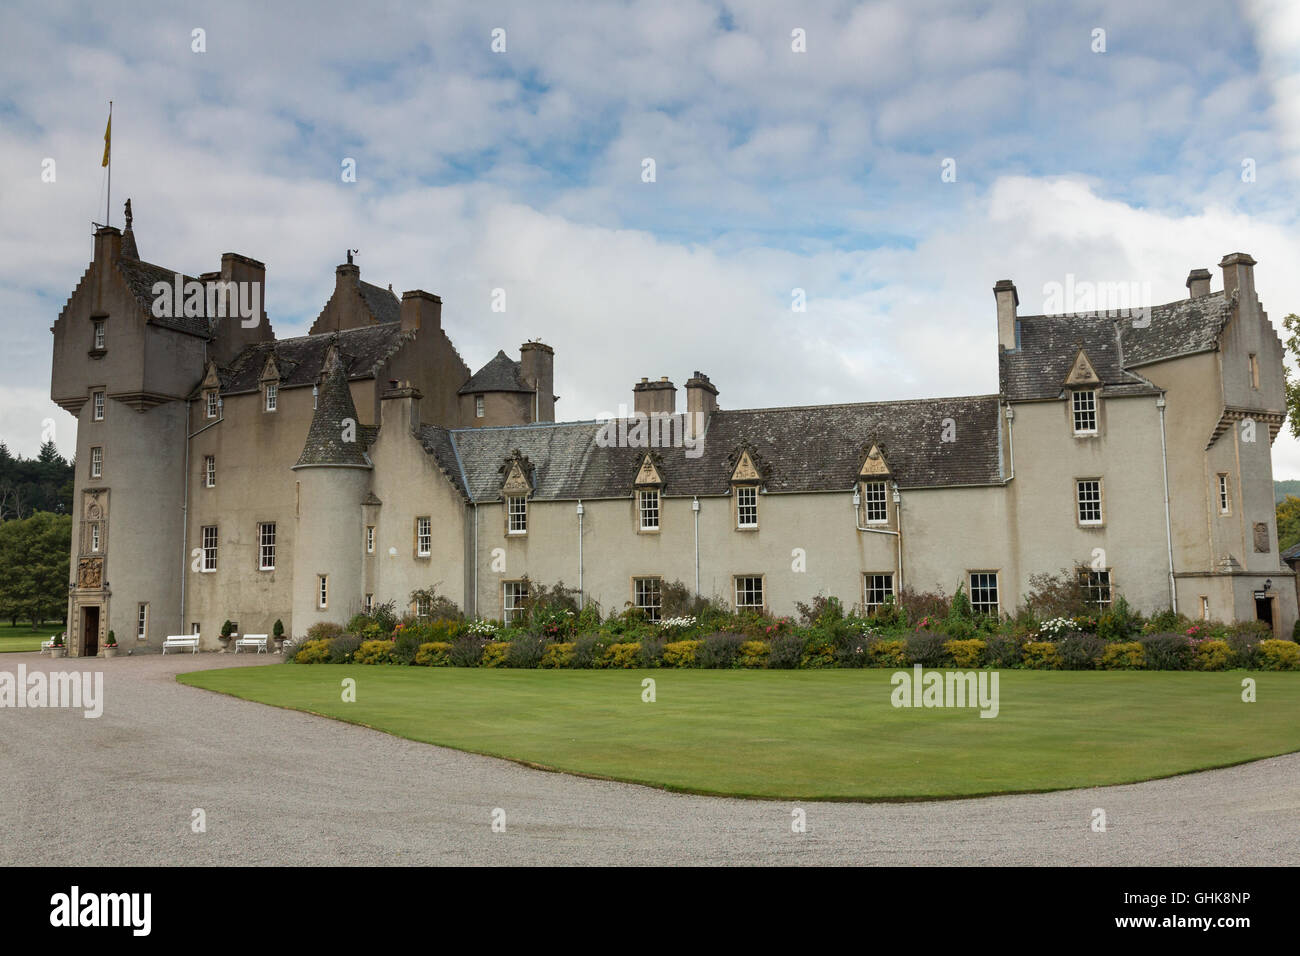 Ballindalloch Castle, known as the 'pearl of the north', is a Scottish castle located in Banffshire, Scotland. Stock Photo